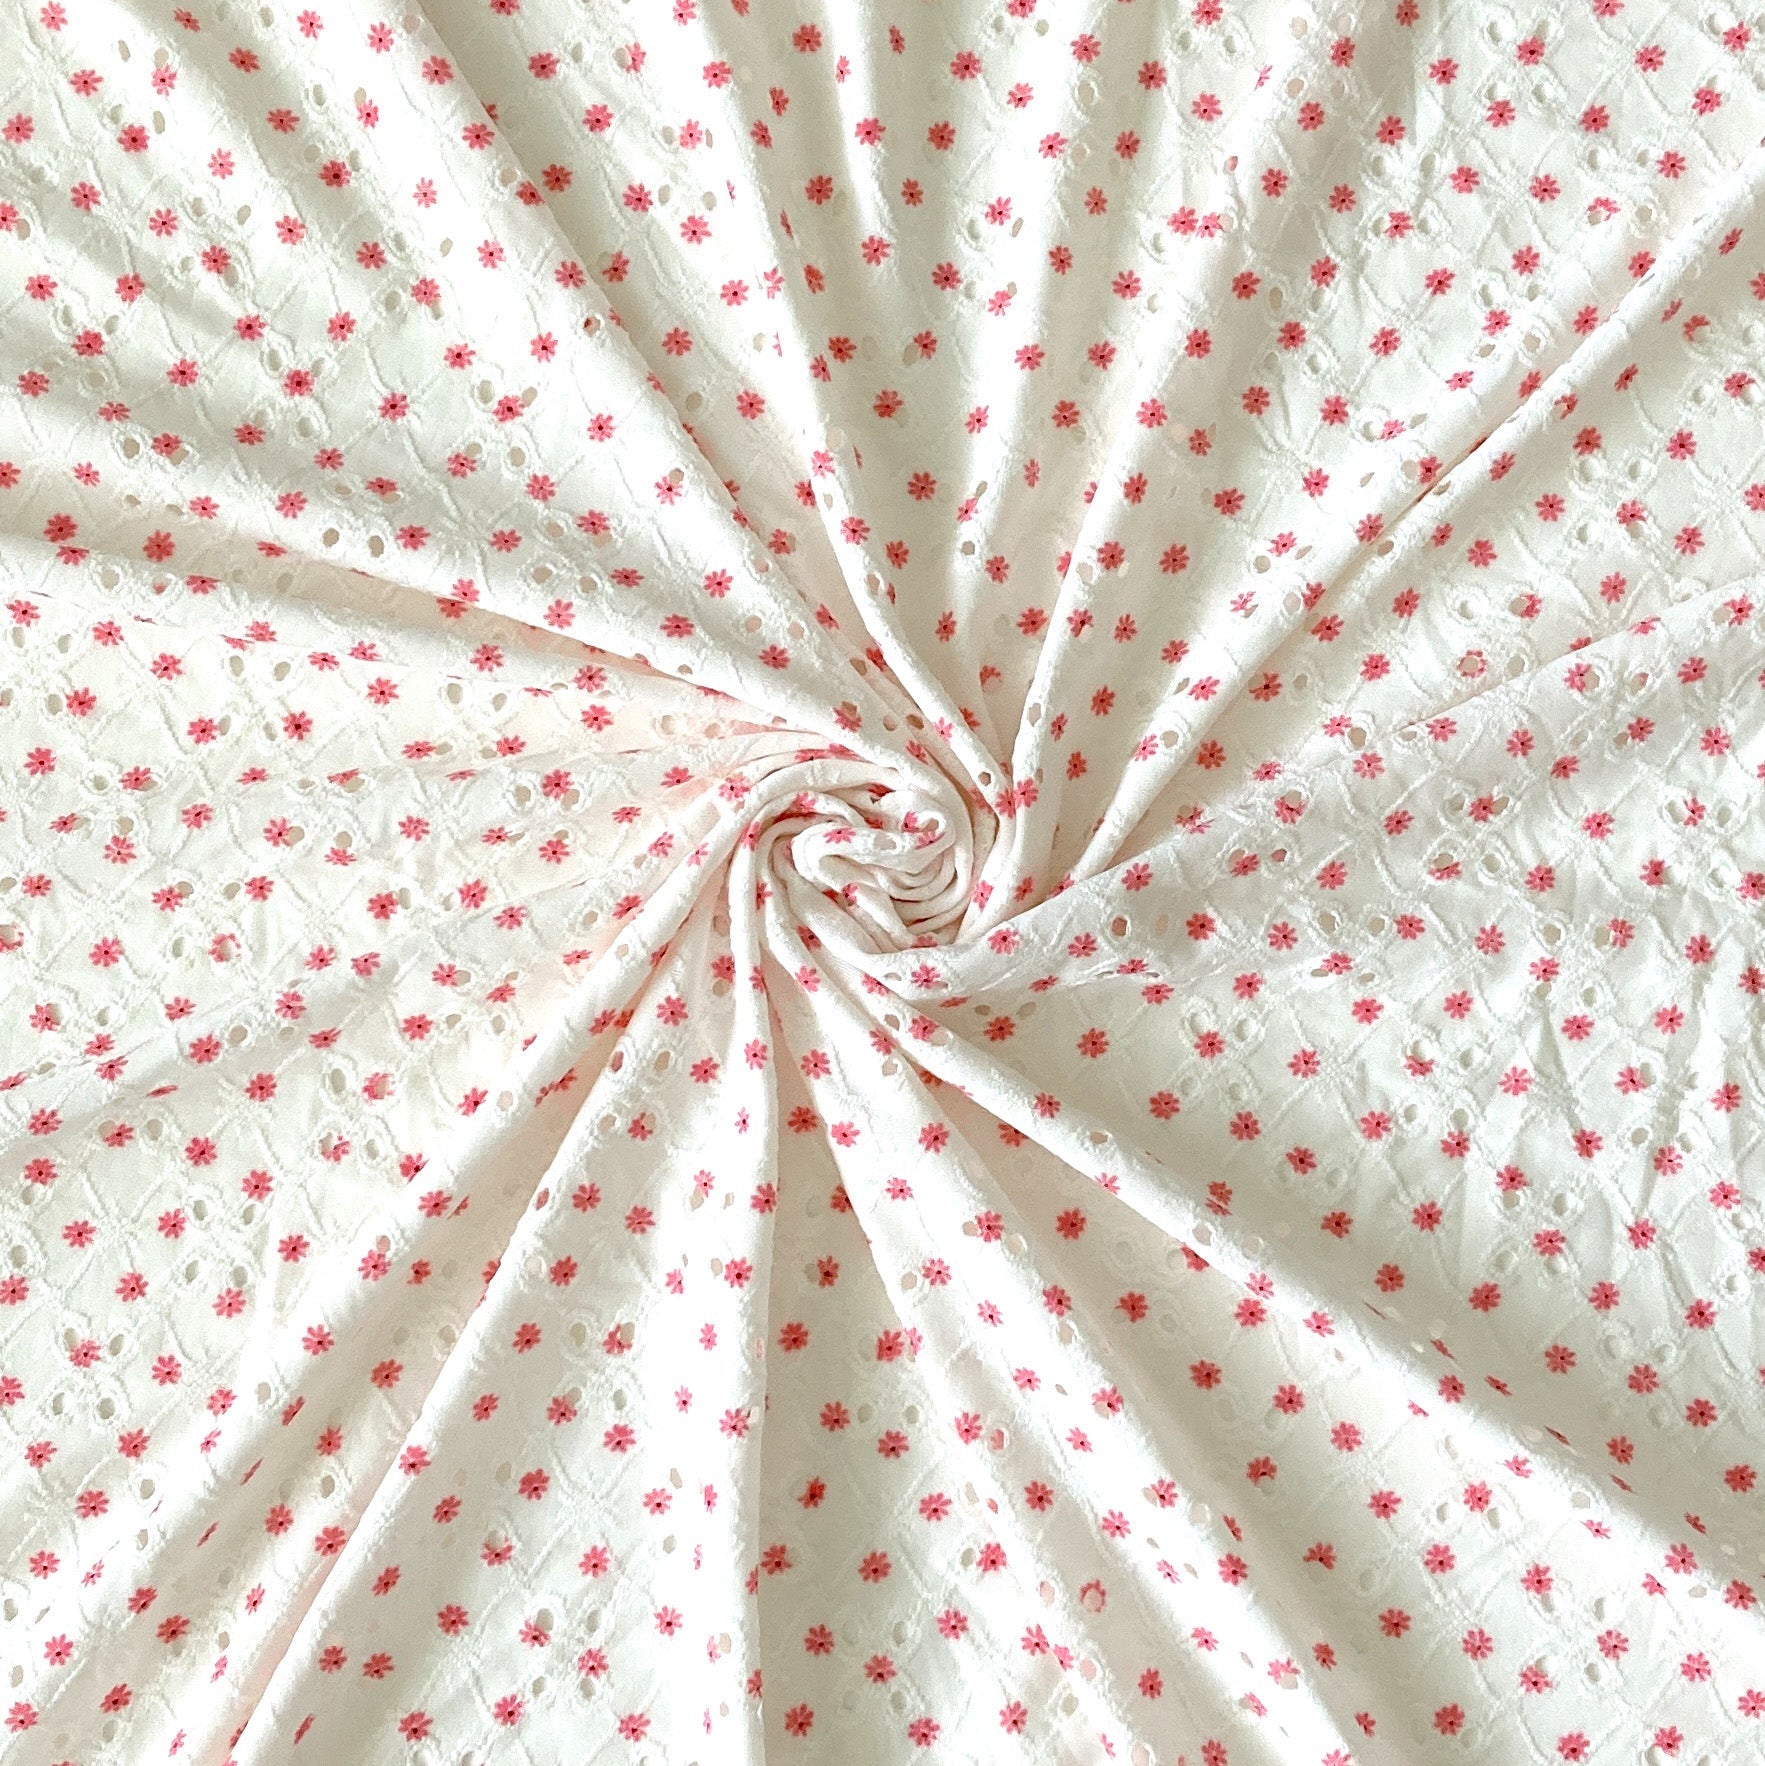 Off White and Salmon Pink Daisy Print Eyelet Poly Spandex Knit Fabric, Raspberry Creek Fabrics, watermarked, restored